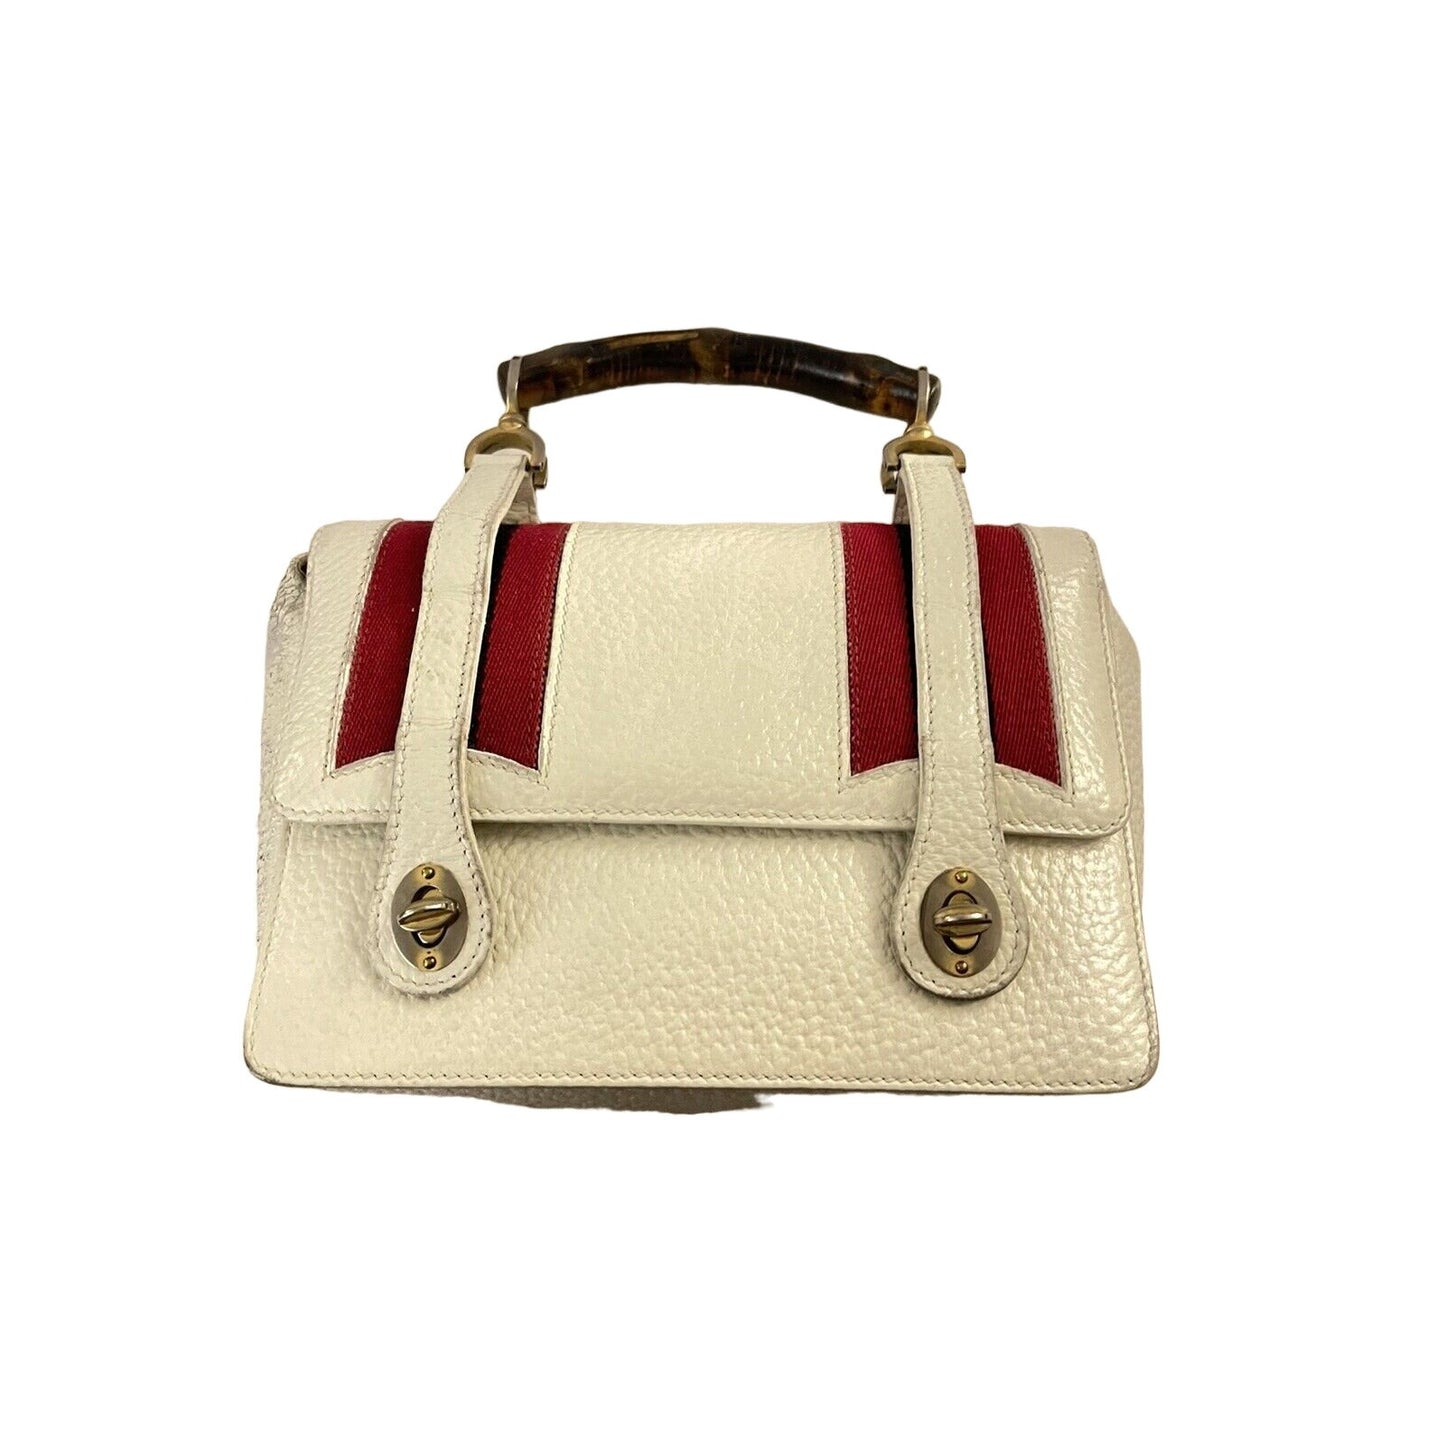 RARE Gucci white leather lunchbox bamboo bag w red & blue stripes